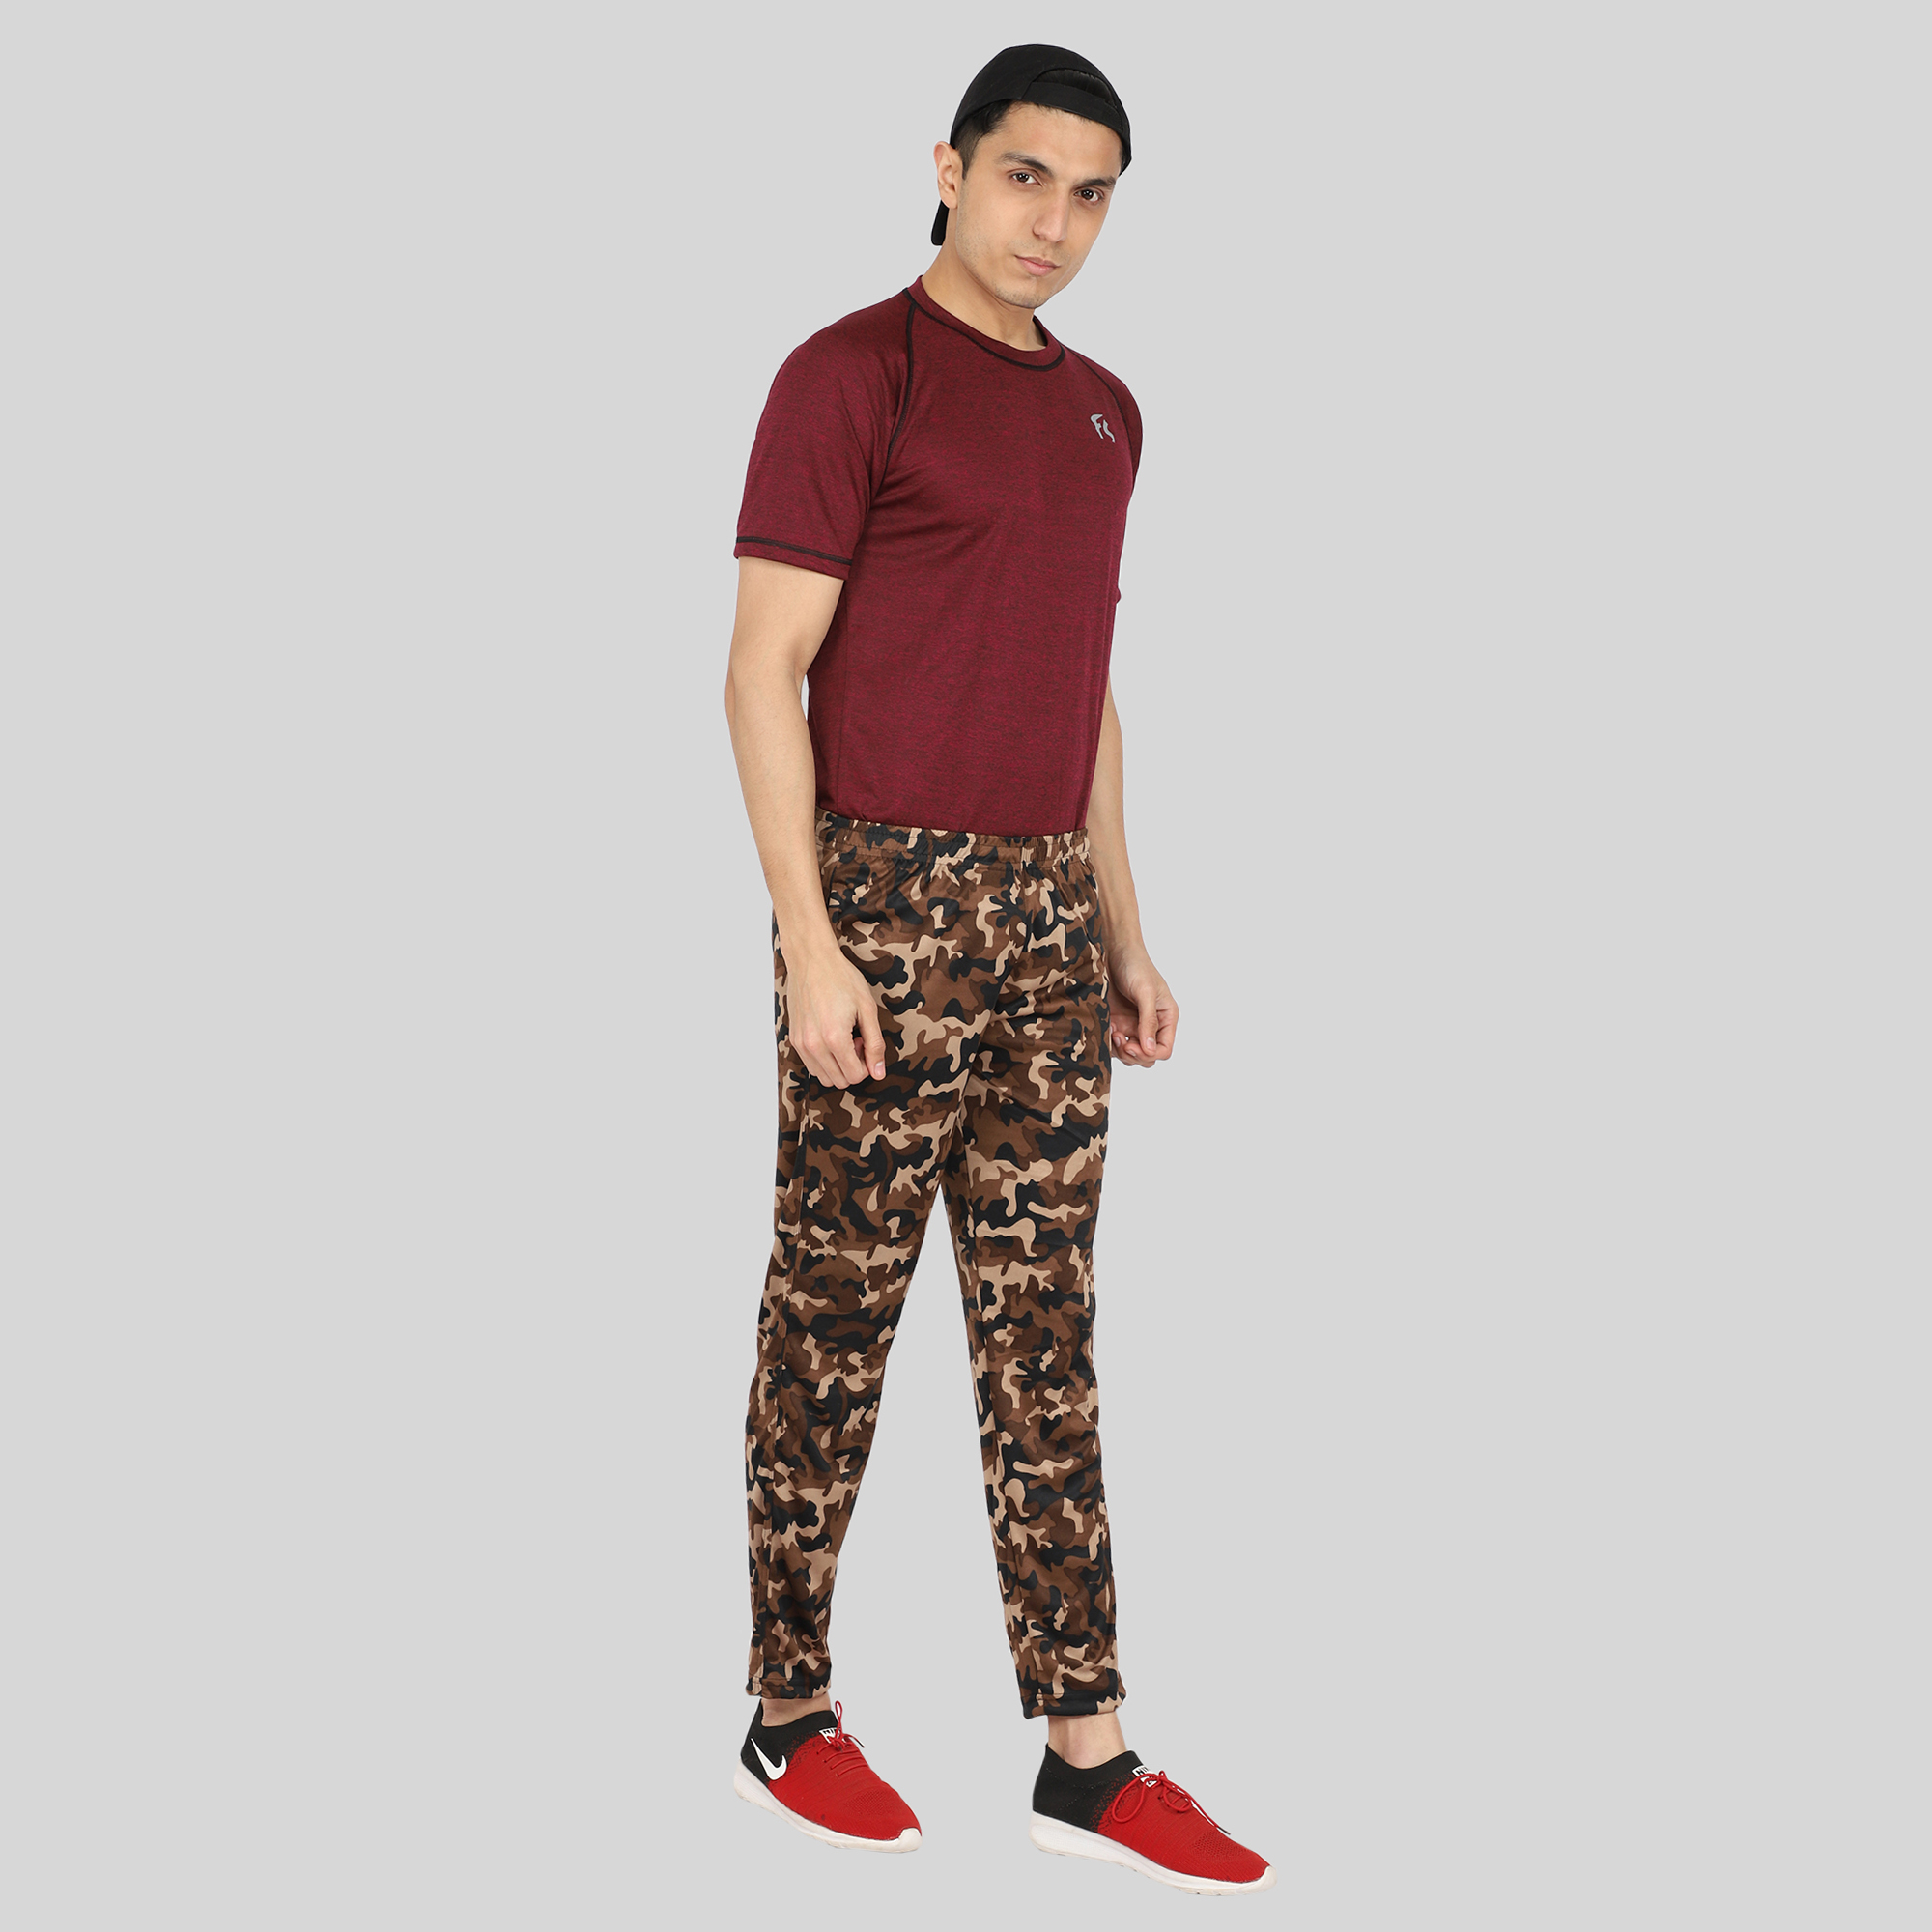 Clifton Men Camouflage Printed Track Pants Olive Xl - Buy Clifton Men  Camouflage Printed Track Pants Olive Xl online in India